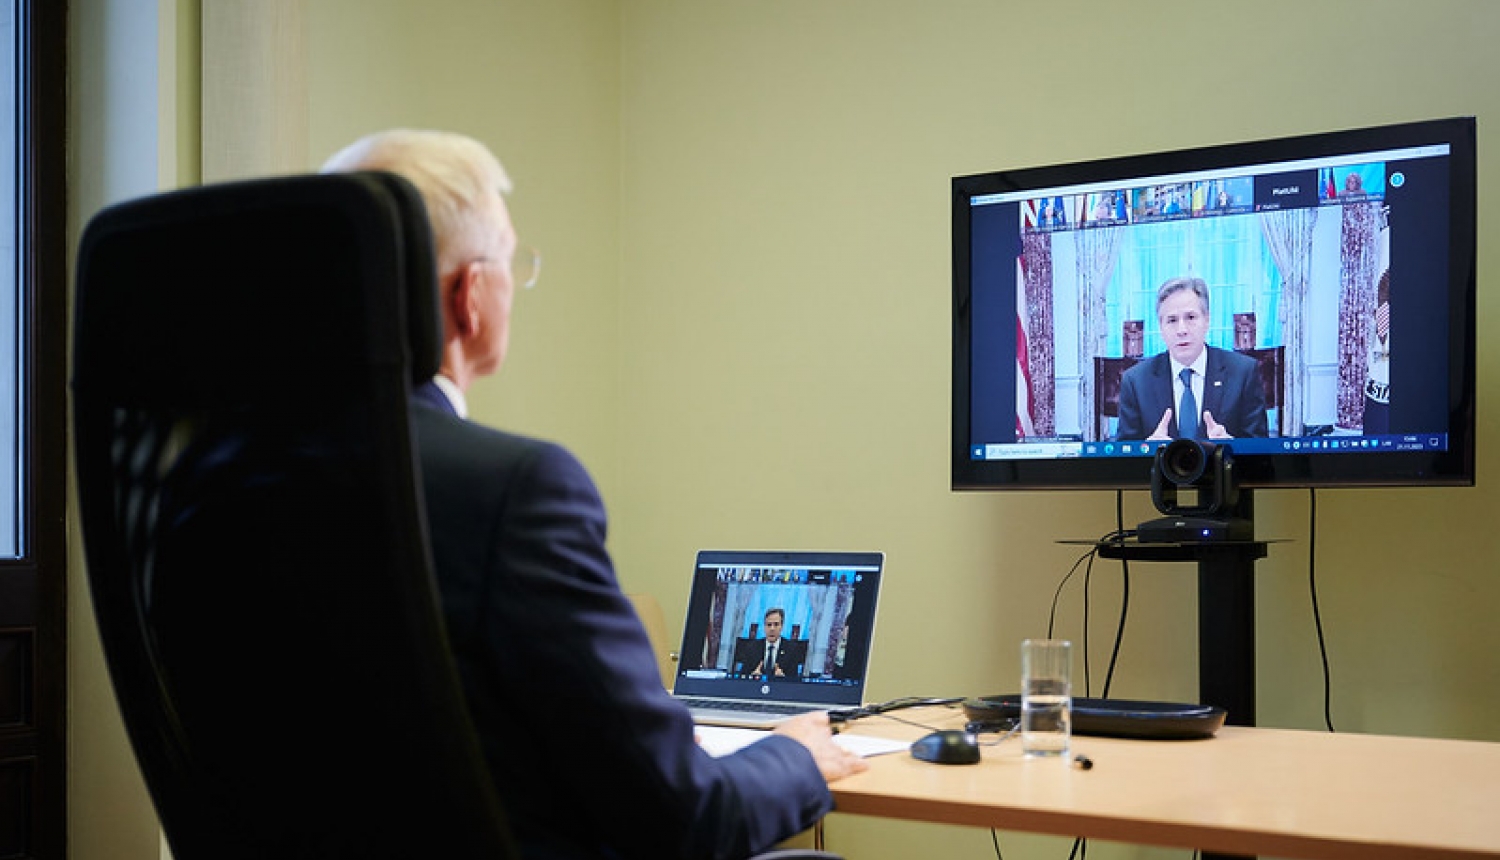 Minister of Foreign Affairs, Krišjānis Kariņš, participating in a G7+ Foreign Ministers video meeting